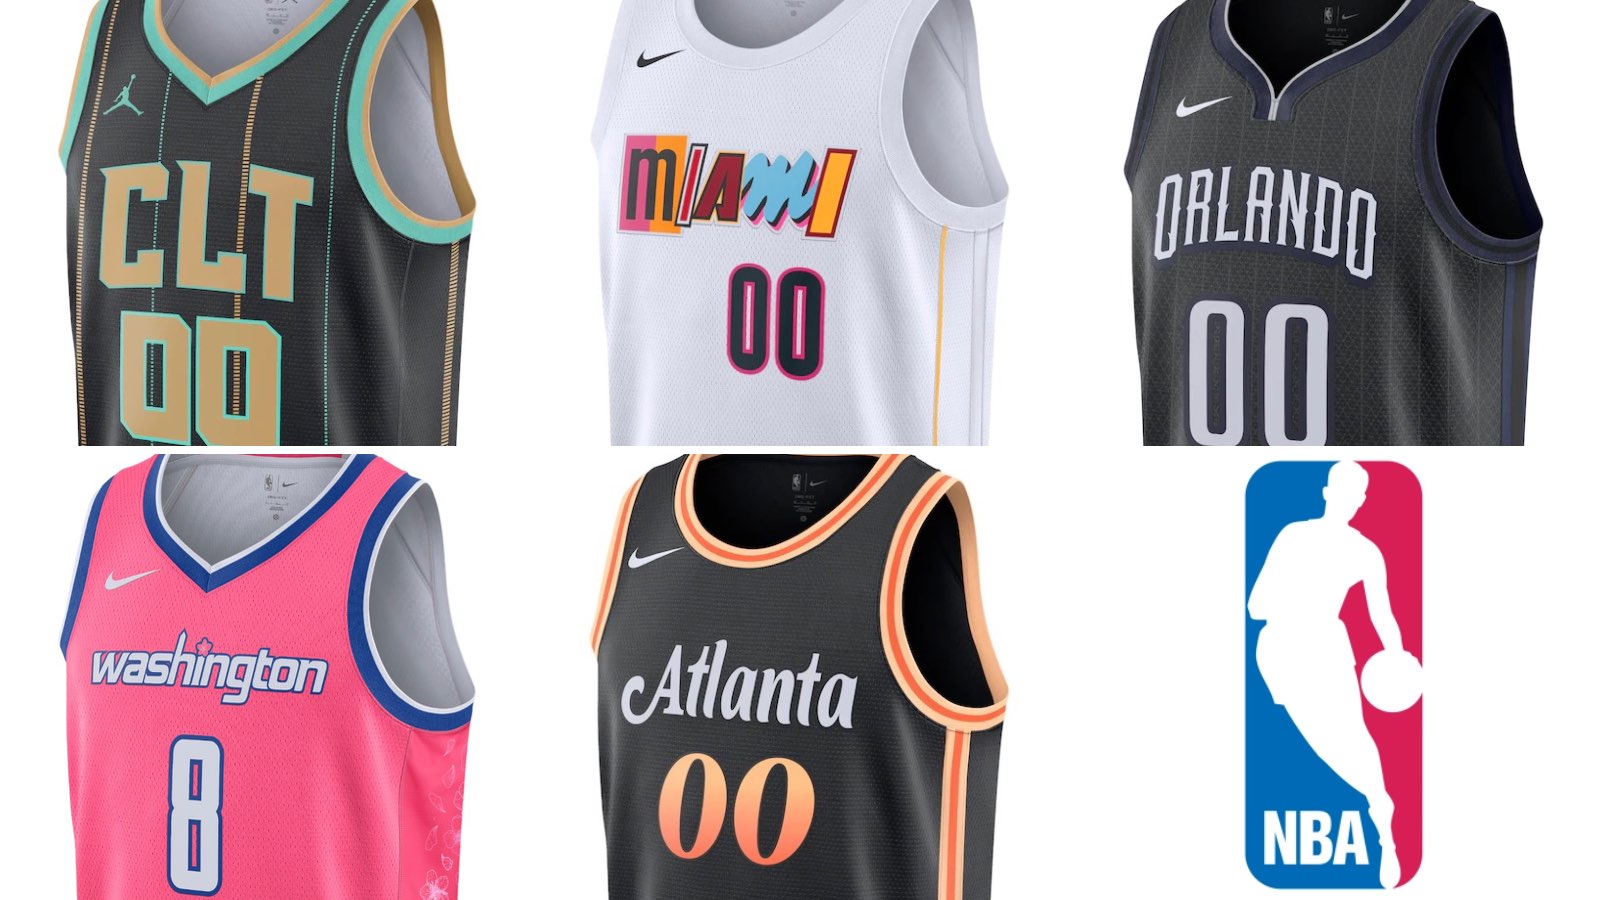 Hawks to unveil new 'Peachtree' City Edition uniforms on Nov. 20